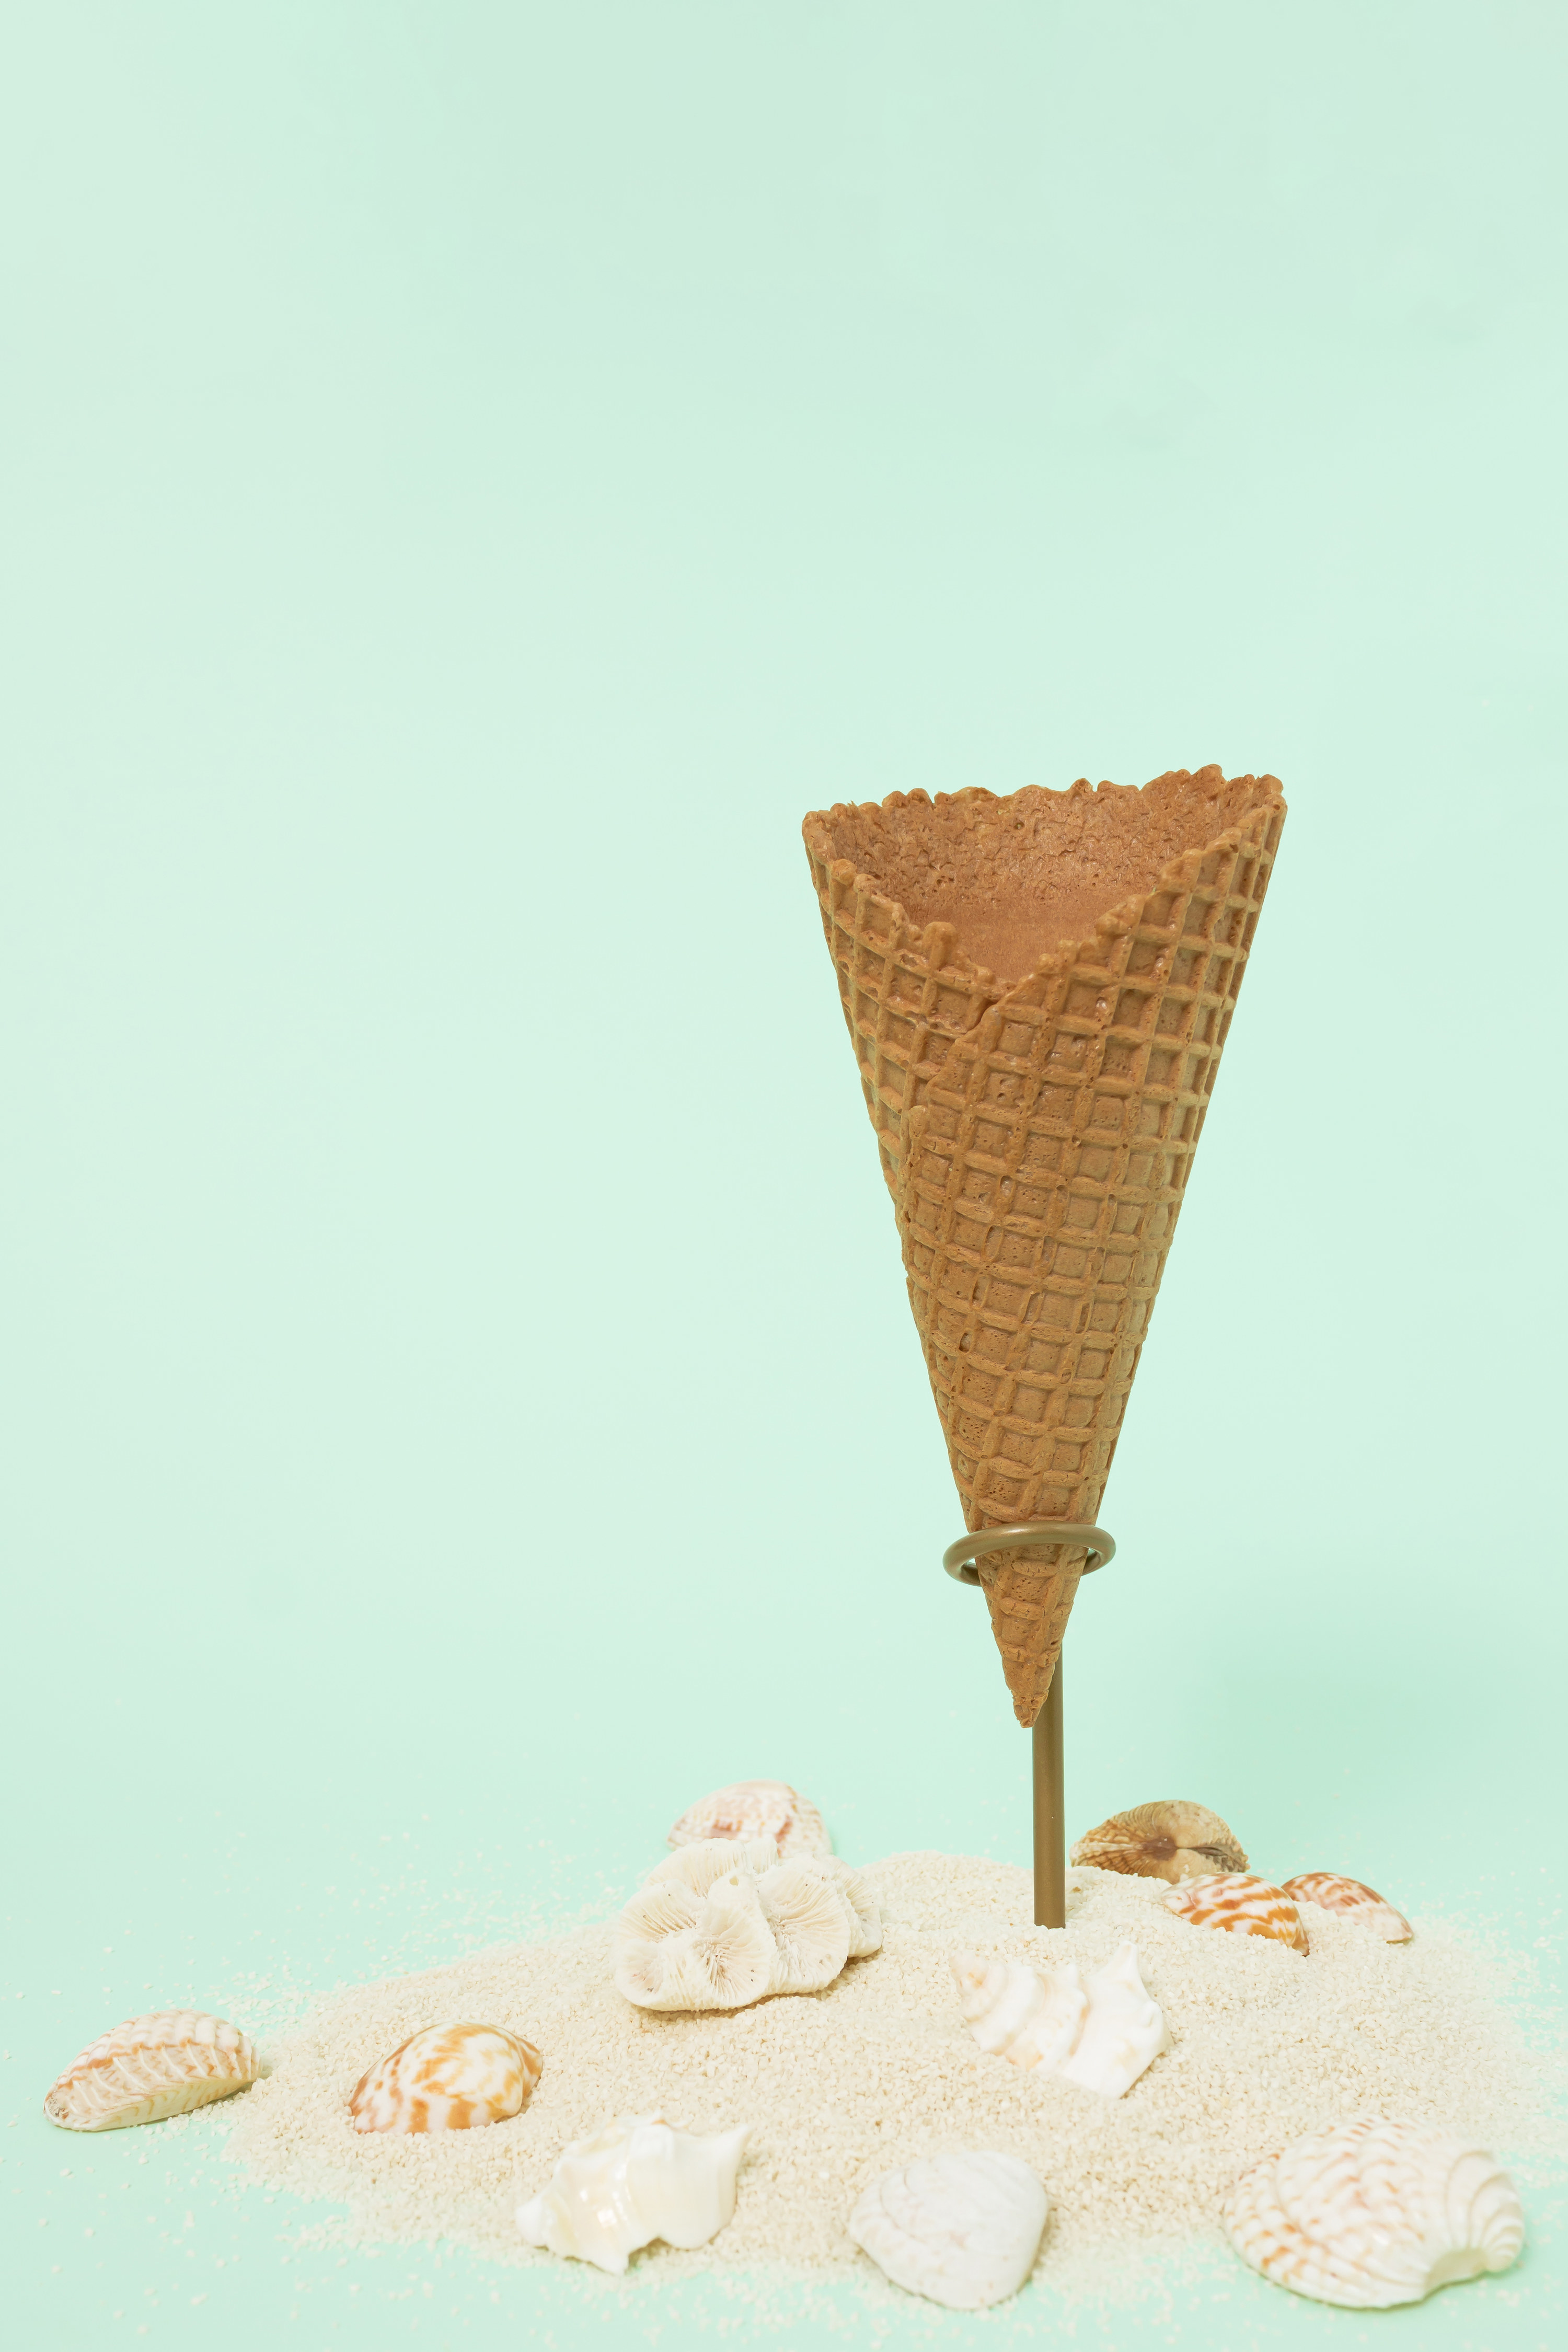 An image of a single ice cream cone without the ice cream, in a cone stand against a mint green background. There are shells and a sprinkling of sand on the ground in front of the cone.